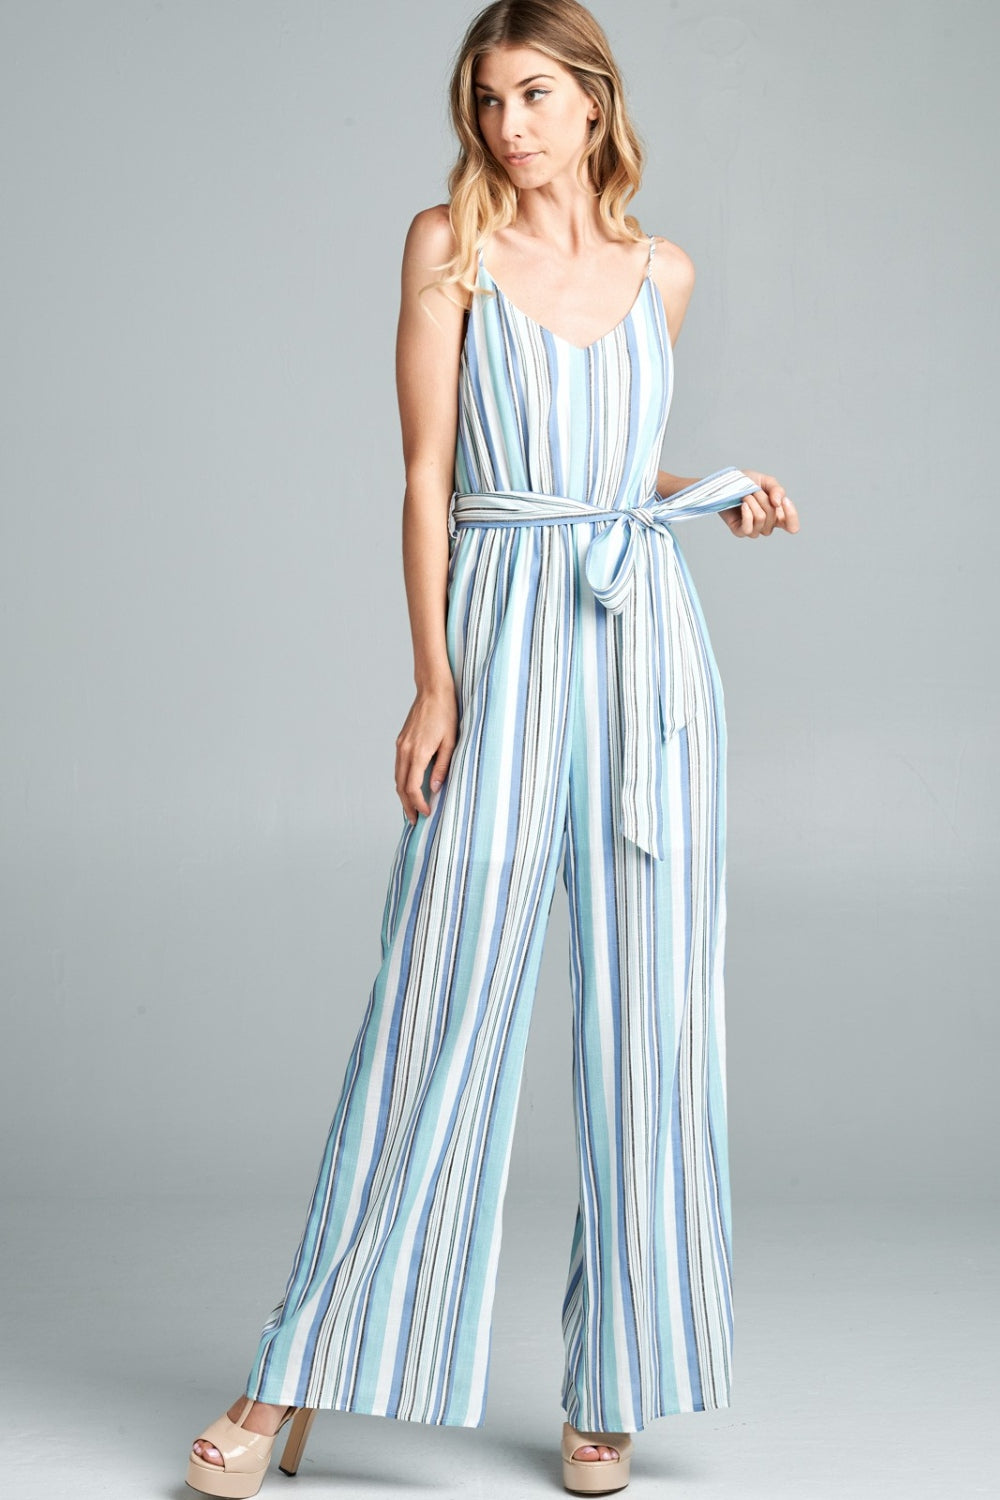 Cotton Bleu by Nu Label Tie Front Striped Sleeveless Jumpsuit - Three Bears Boutique